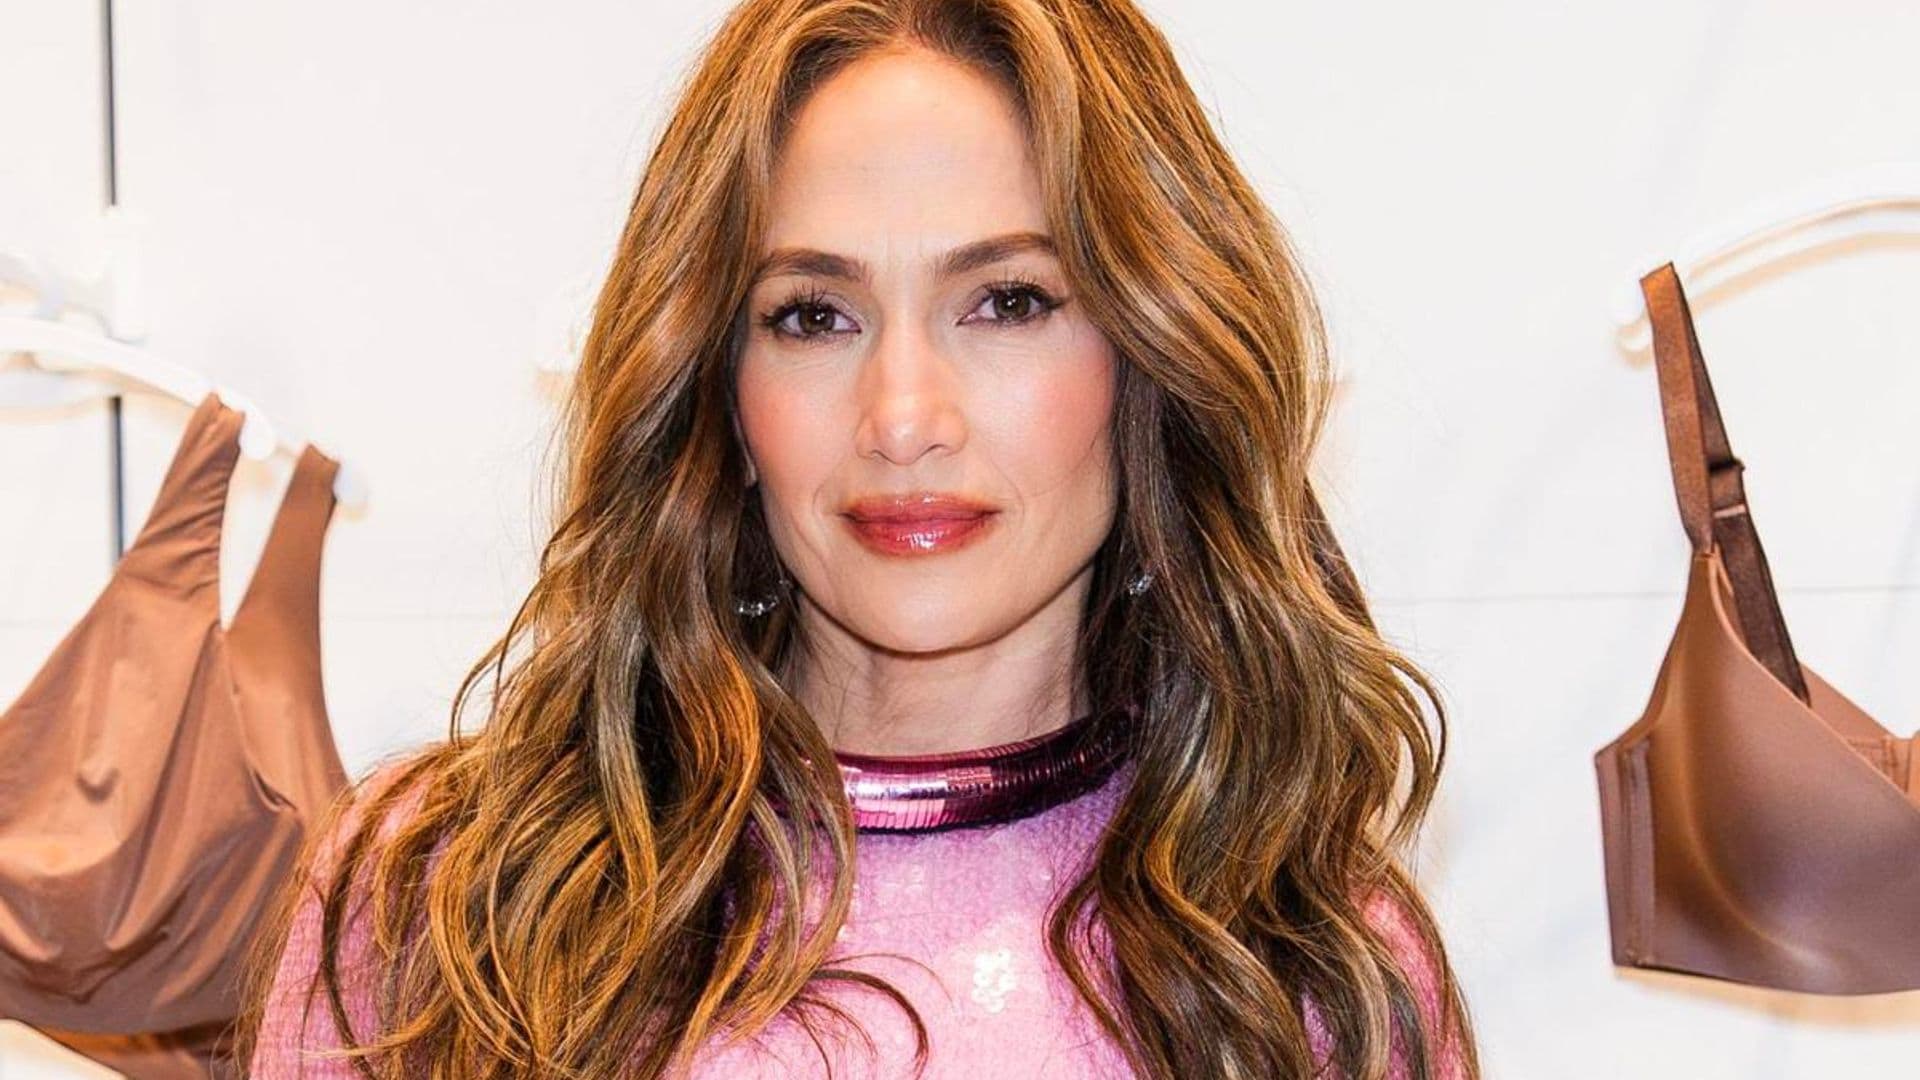 Jennifer Lopez shows off her figure in stunning leather dress in latest night out